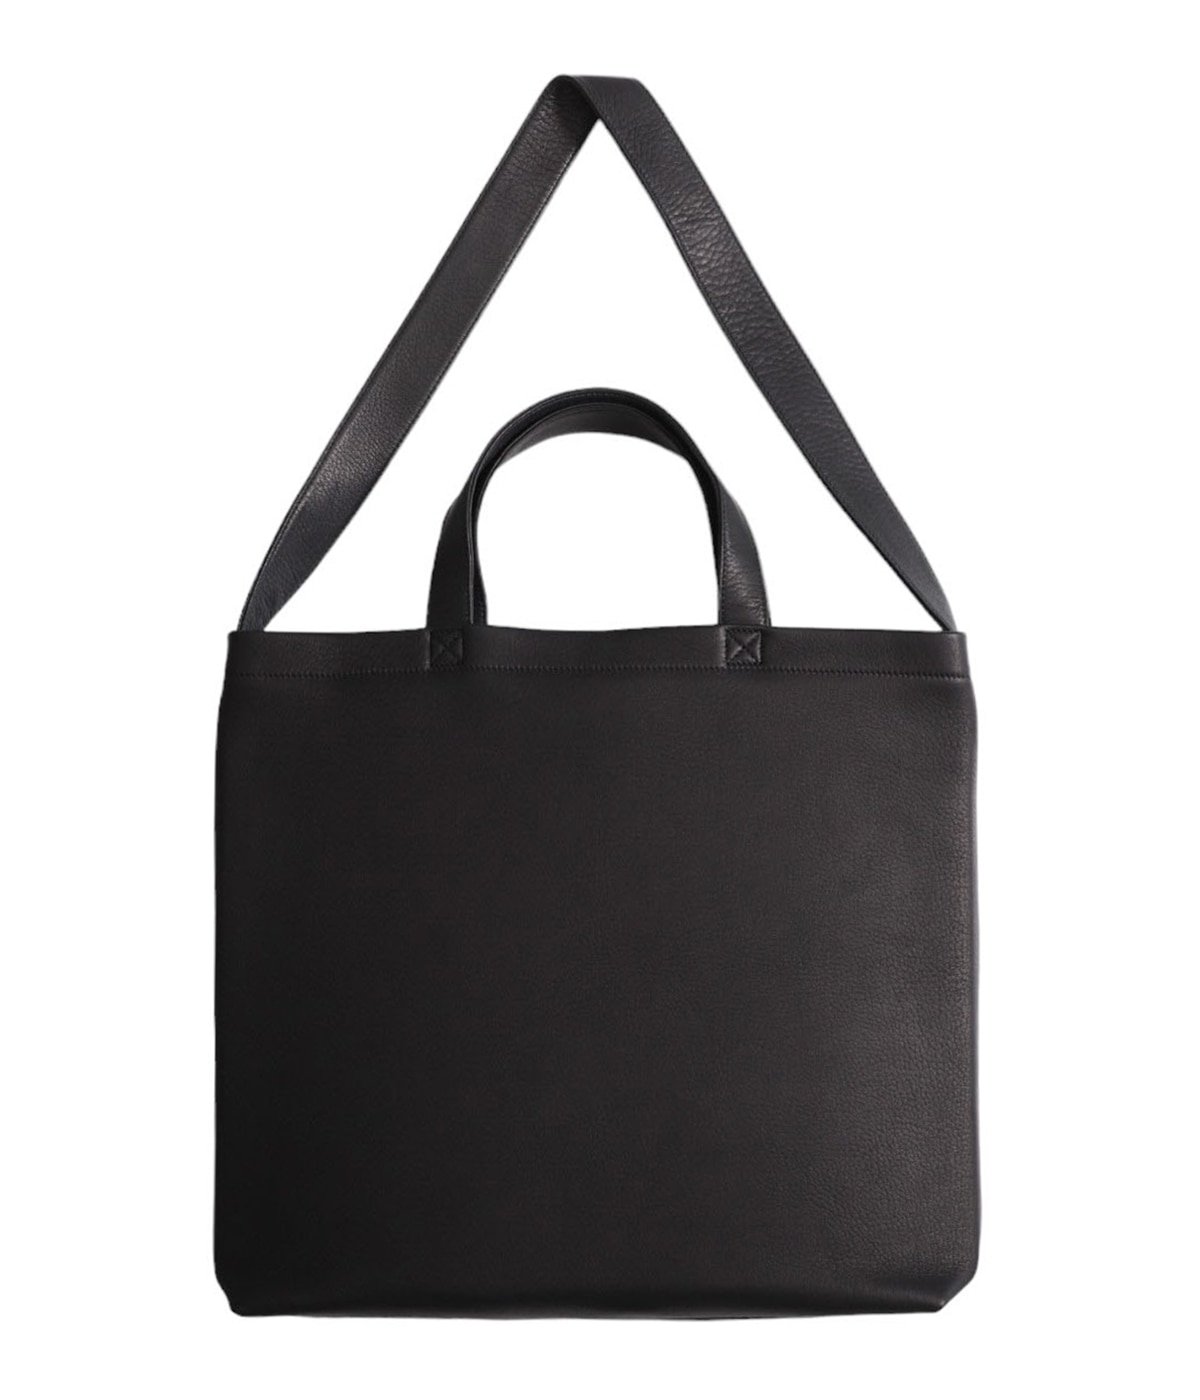 Double Faced SHOULDER TOTE M | Aeta(アエタ) / バッグ トートバッグ